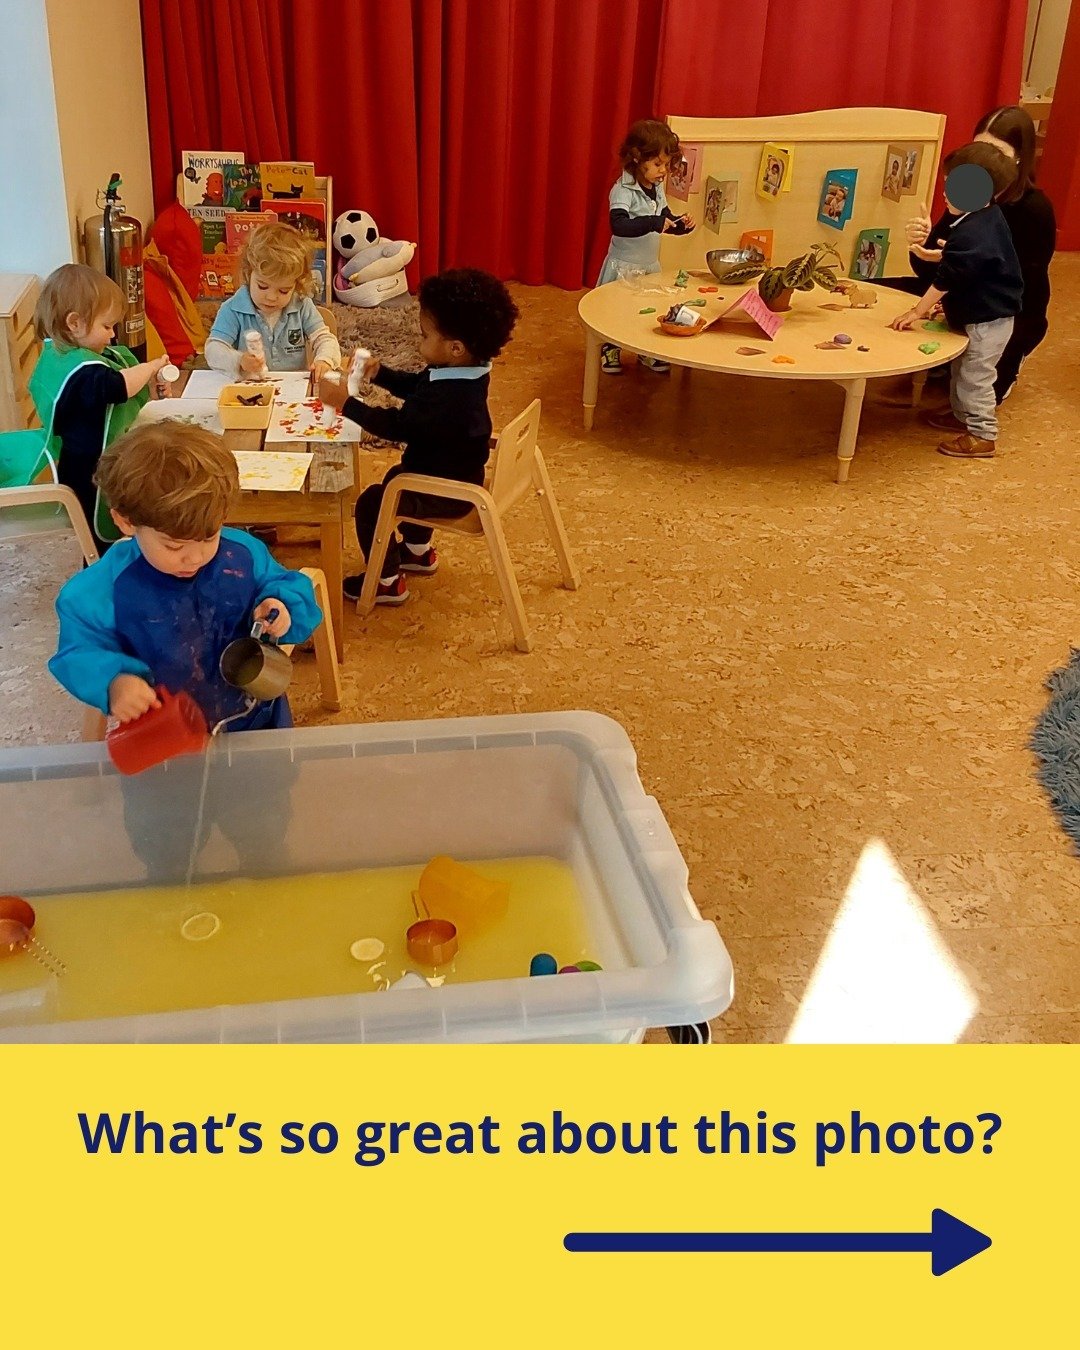 This photo is now all over our website!

You can see so much about our approach to early years education at Two Hands Preschool from it.

Of course there's plenty you can't see, such as the outdoor learning, the daily outings, the meals, the staff to